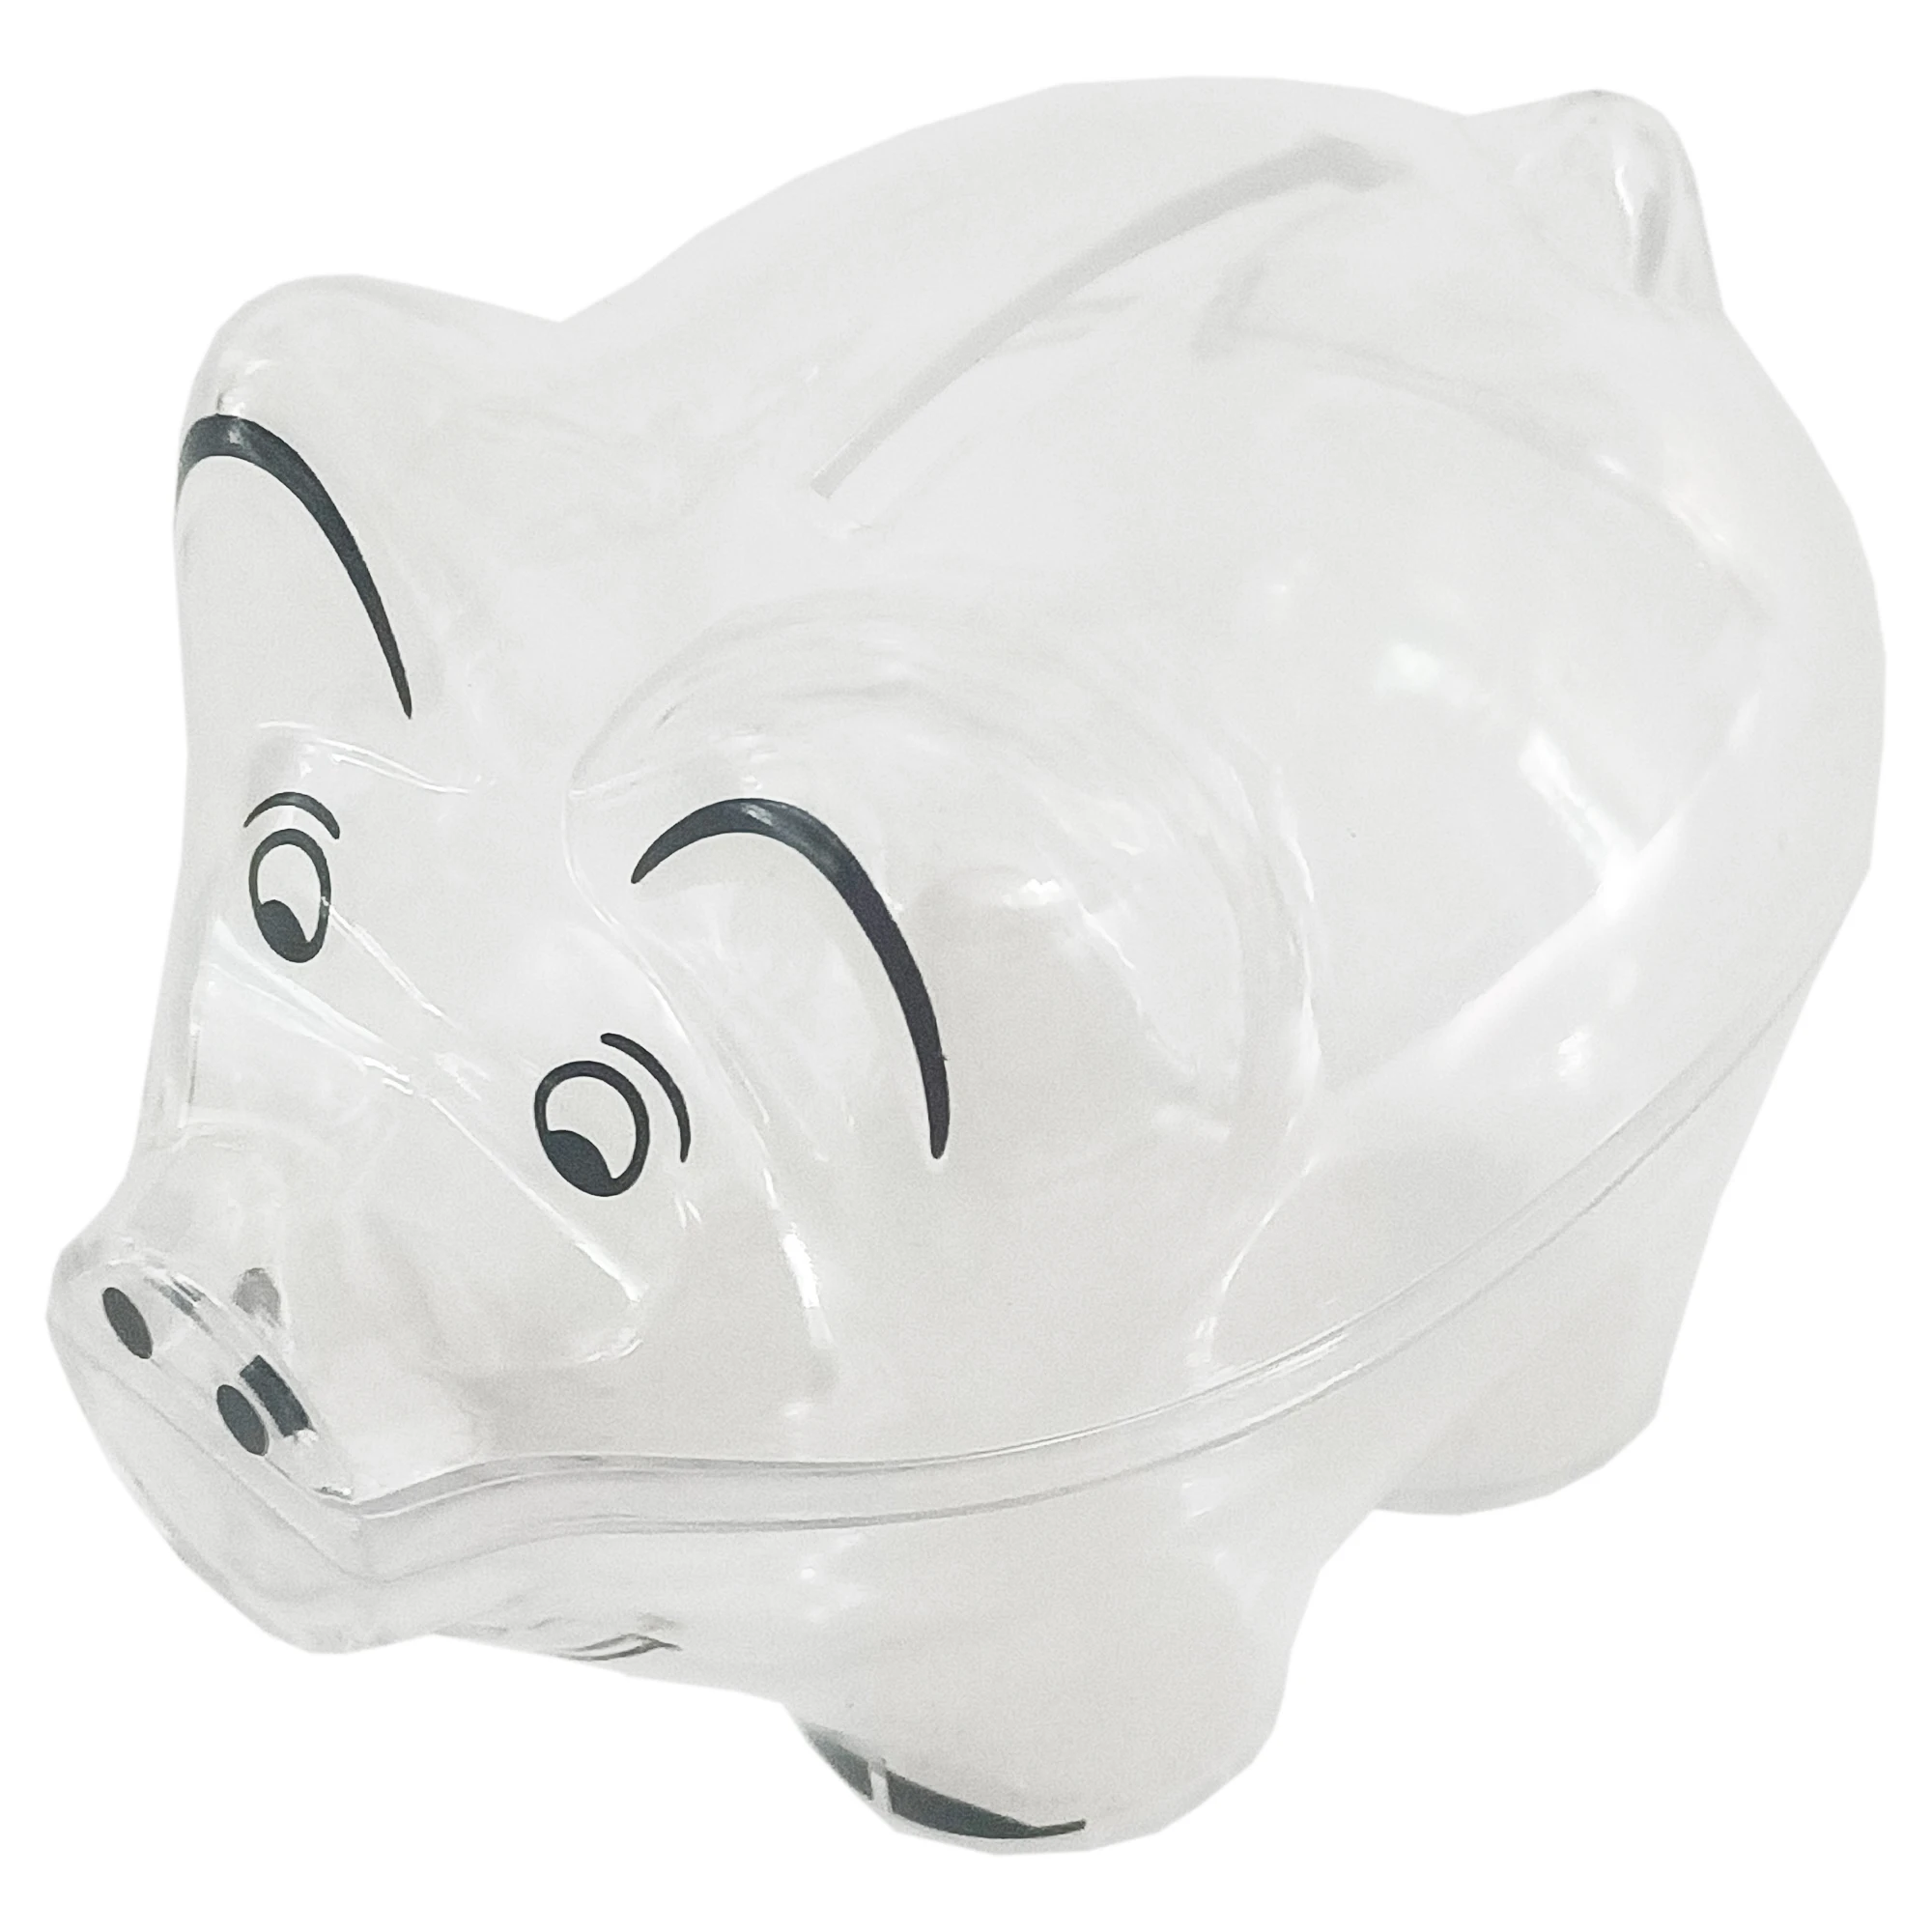 Clear Piggy Banks For Kids Plastic Coin Collection Box Buy Piggy Banks For Kids Coin Collection Box Clear Plastic Piggy Bank Product On Alibaba Com